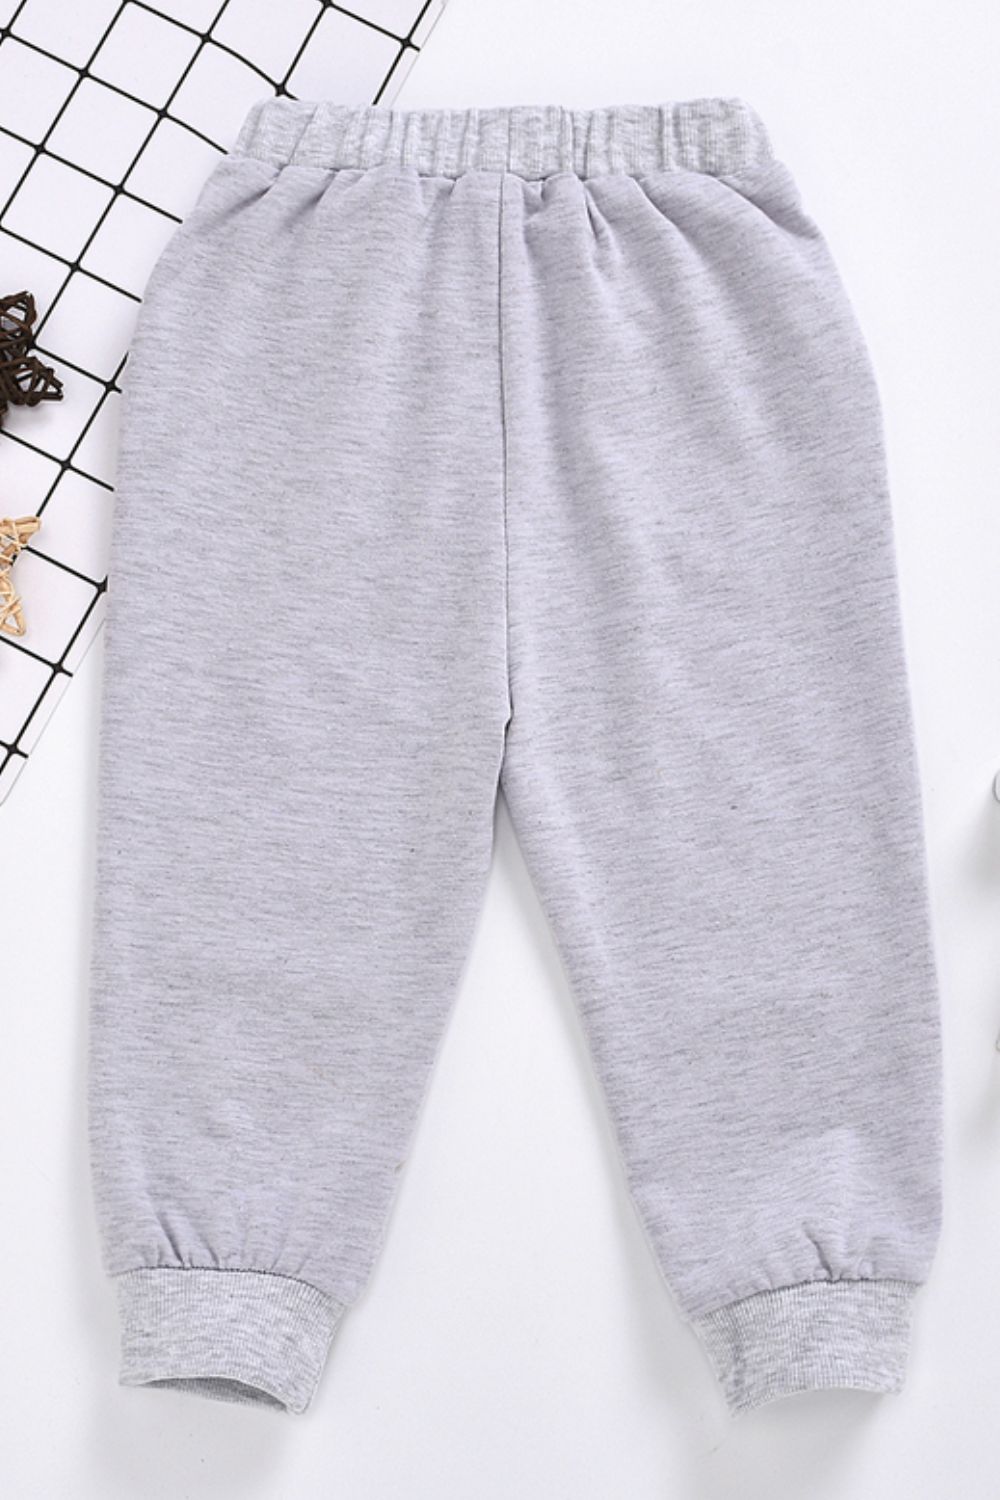 Kids Panda Graphic Joggers with Pockets